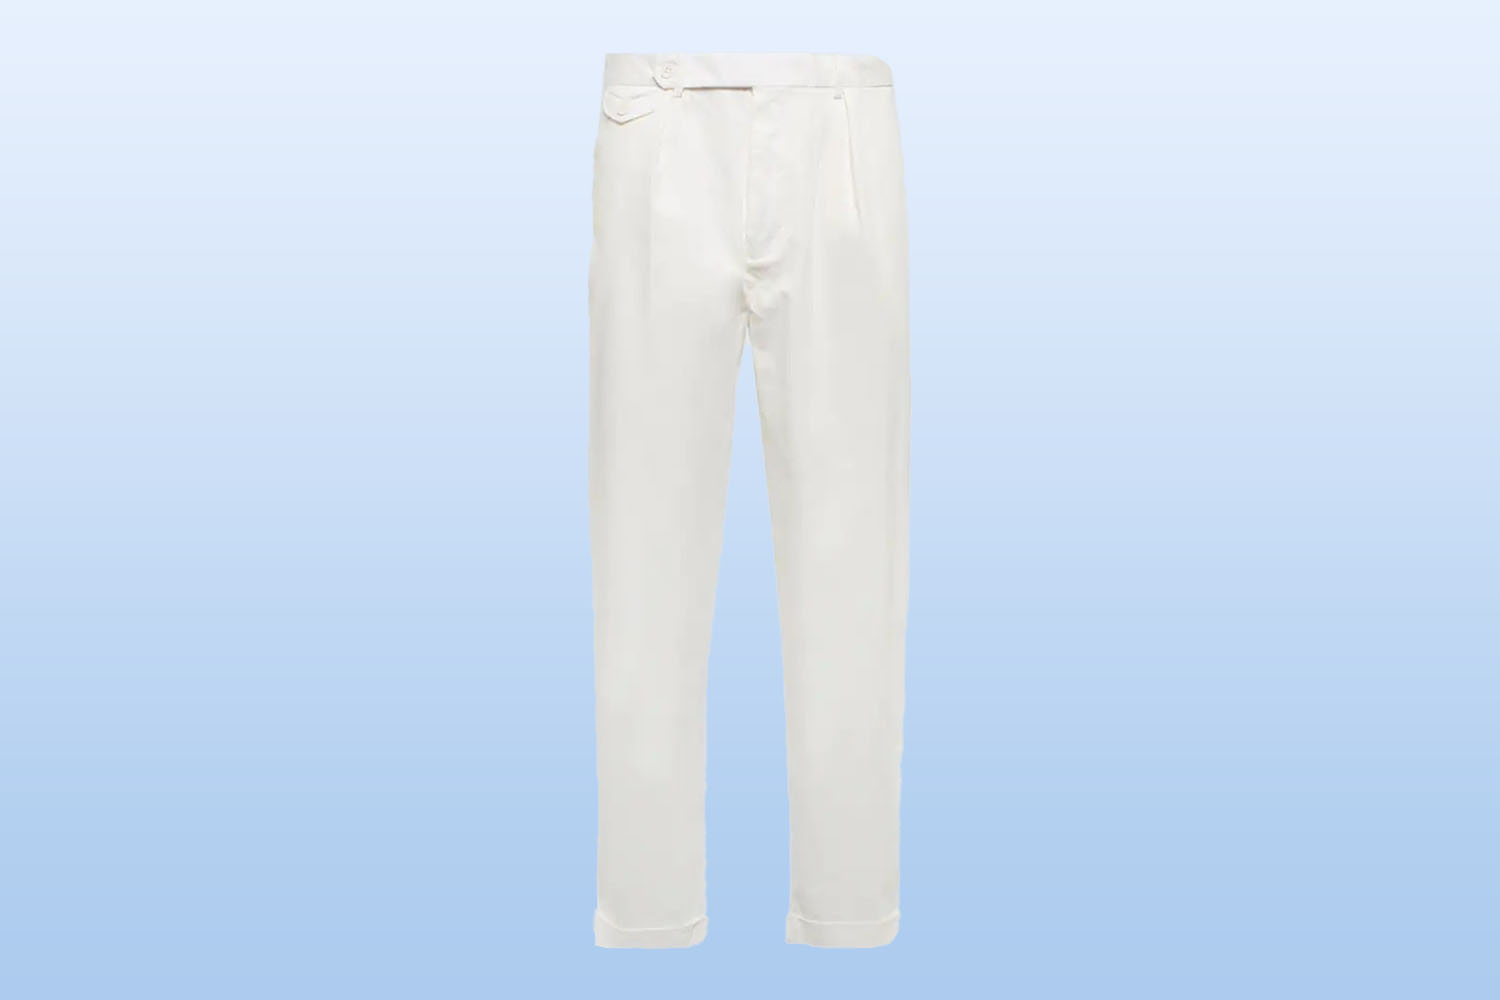 a pair of white trousers from mytheresa on a light blue background